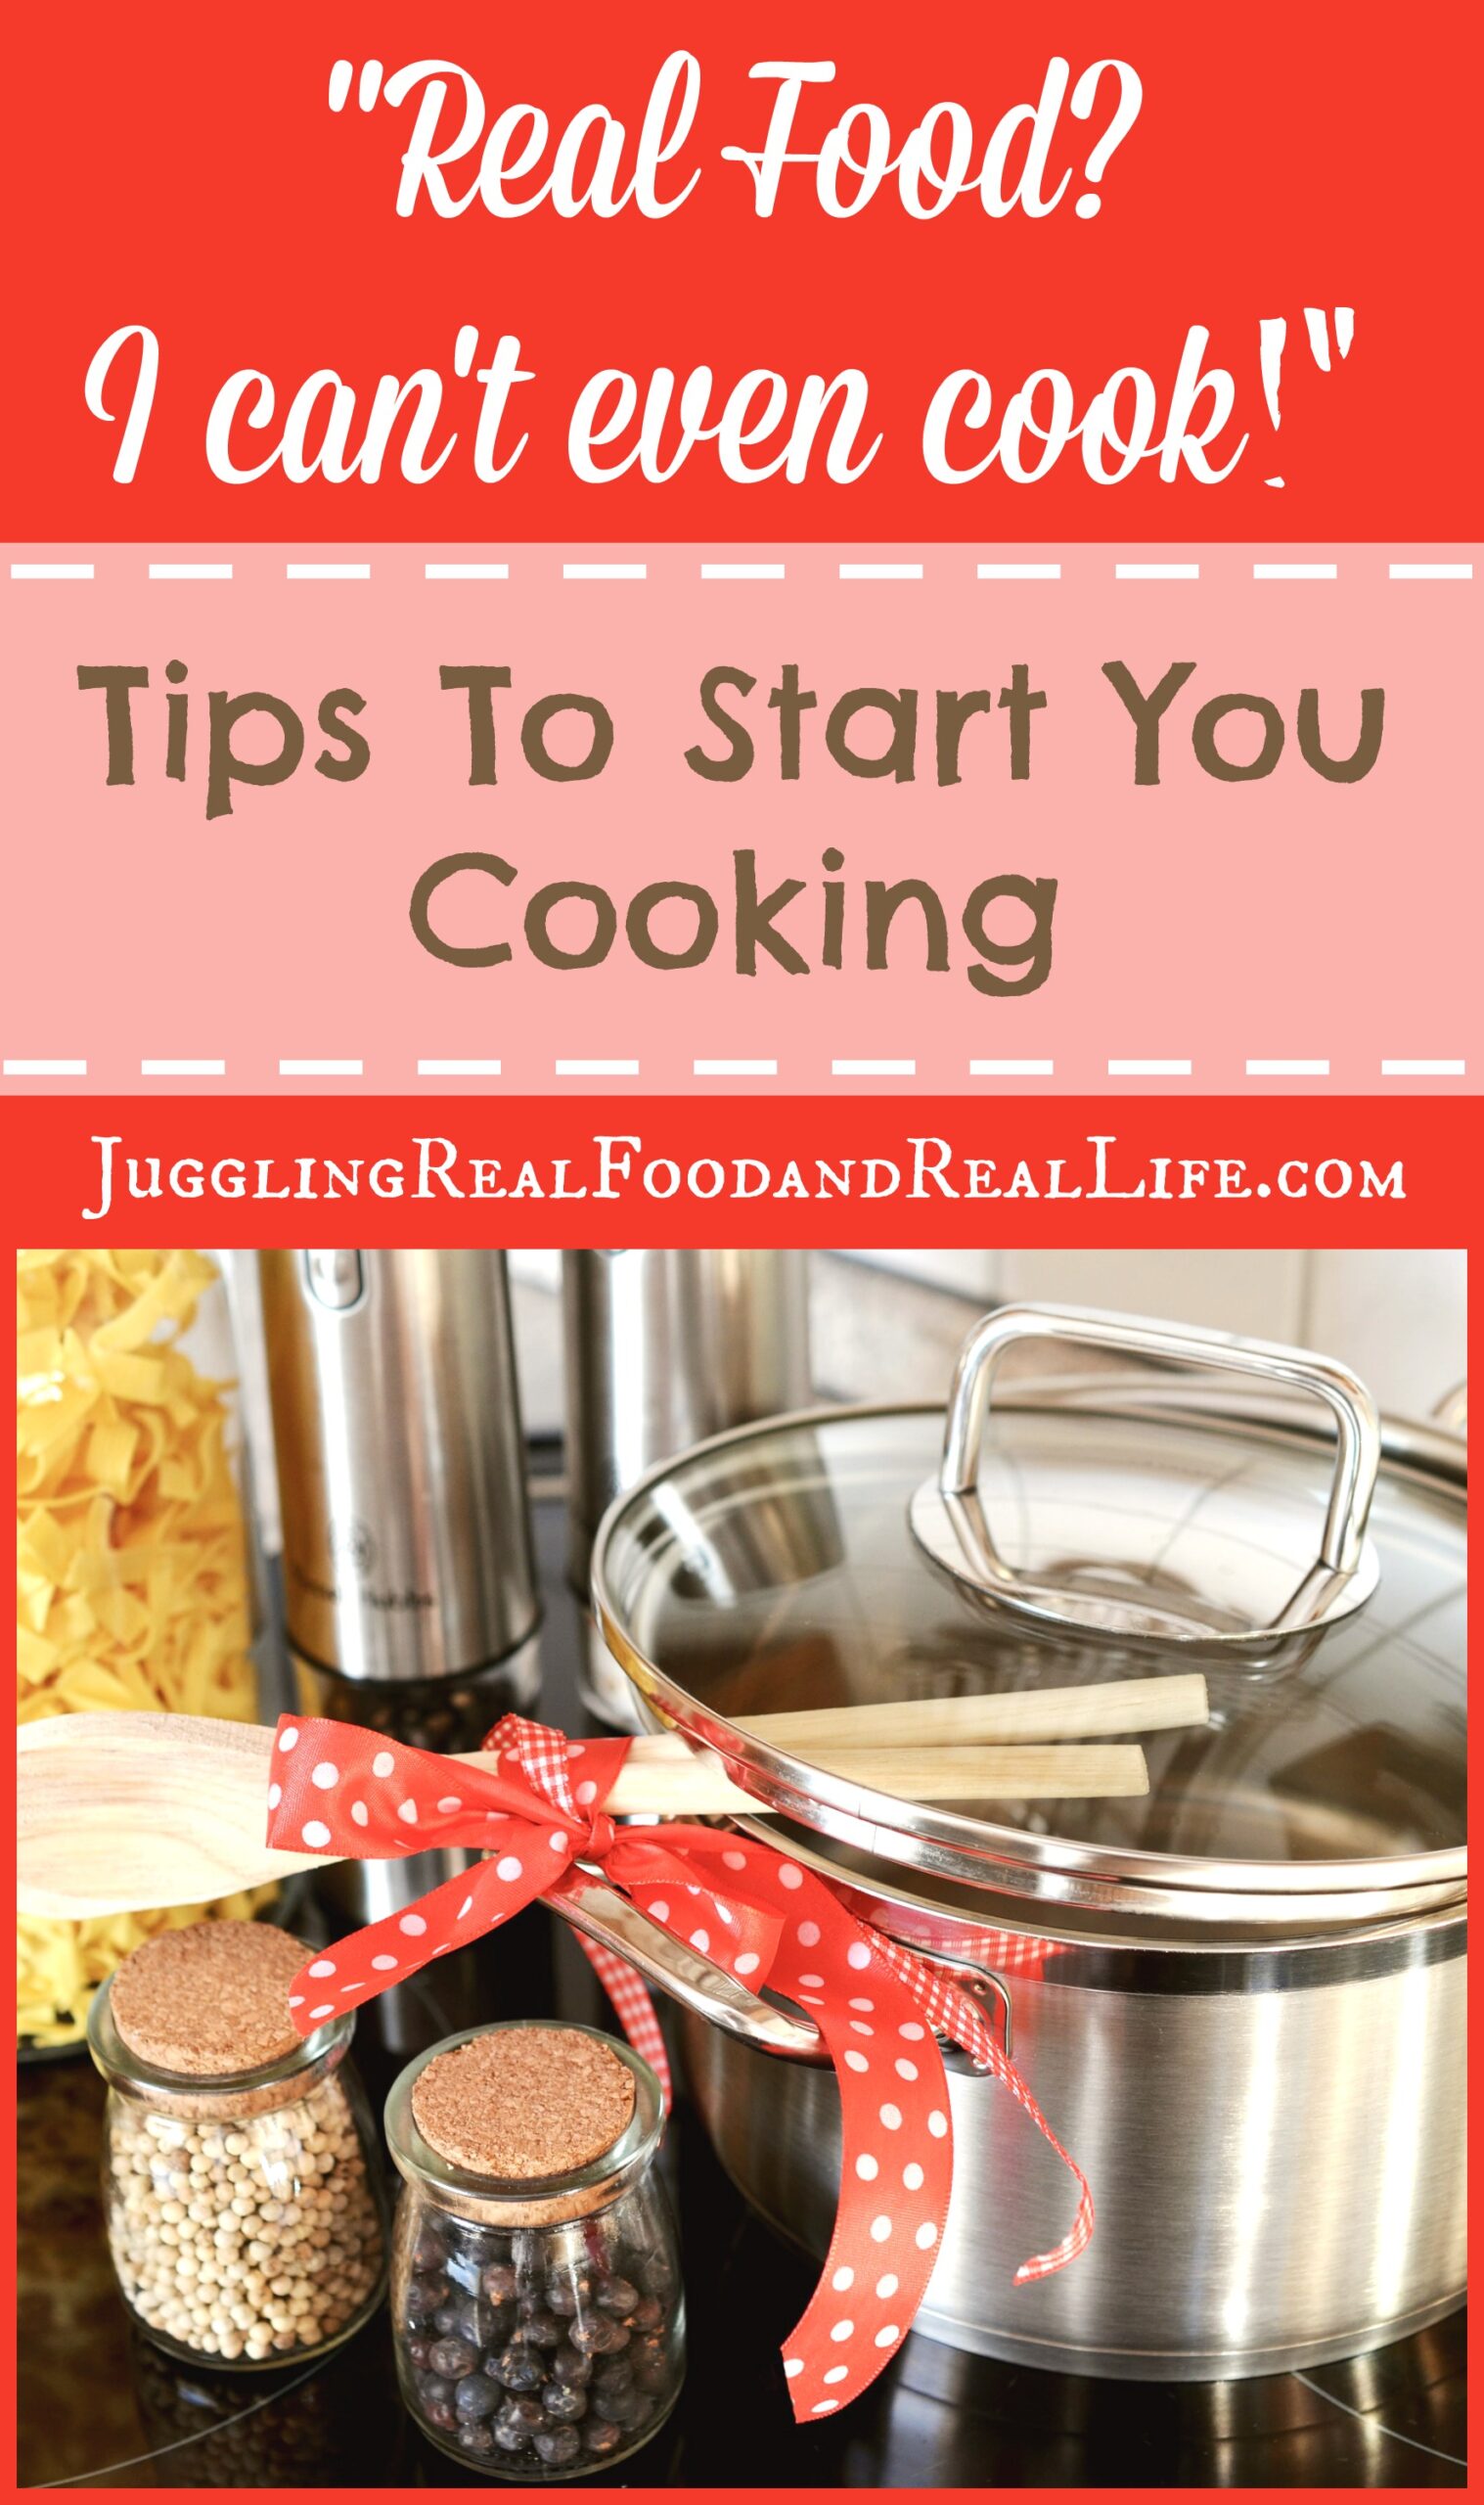 “Real Food? I Can’t Even Cook!” Tips To Get You Cooking